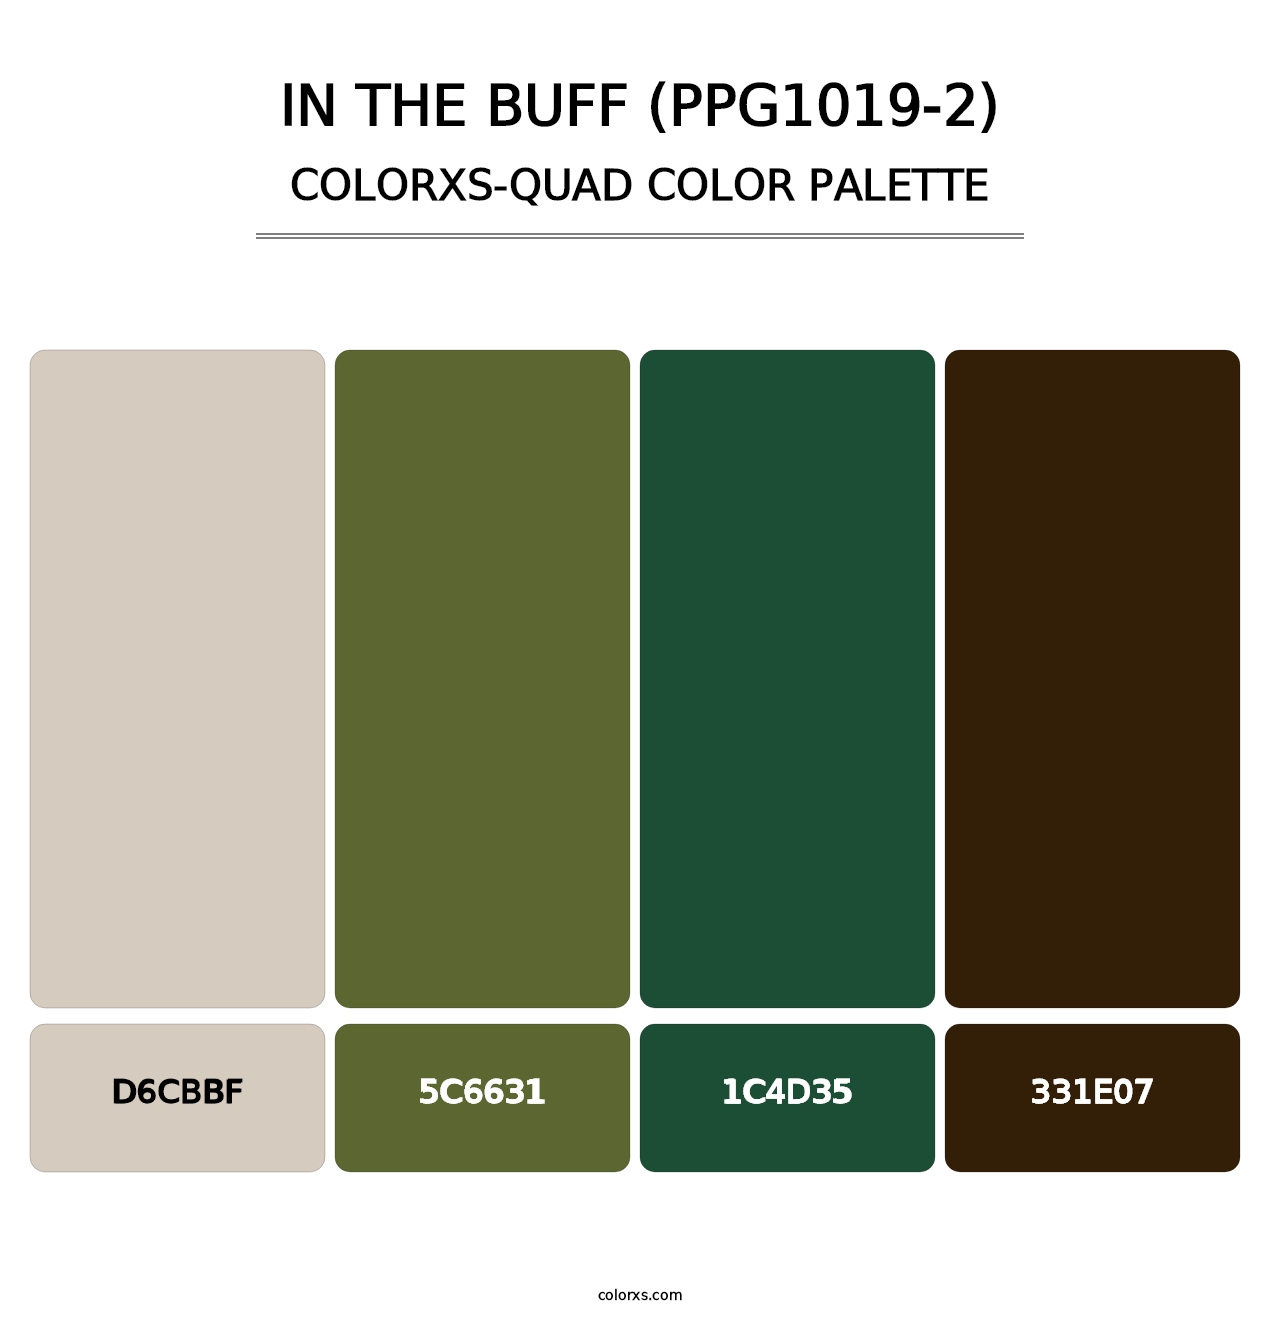 In The Buff (PPG1019-2) - Colorxs Quad Palette